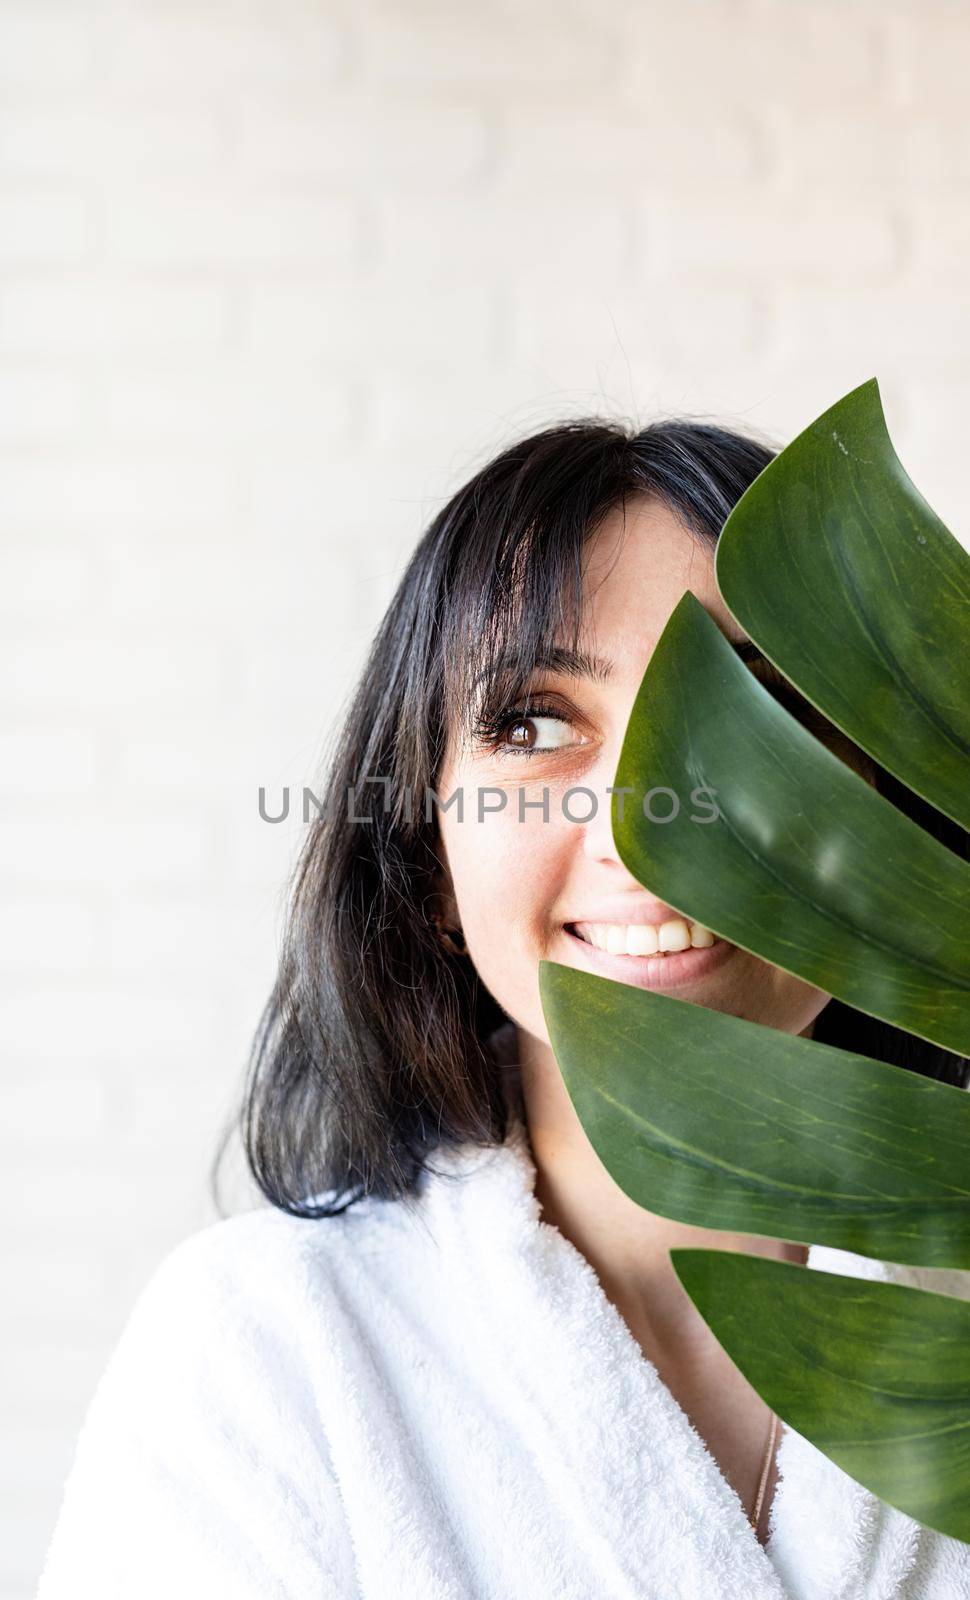 Spa Facial Mask. Spa and beauty. Happy beautiful brunette middle eastern woman wearing bath robes holding a green monstera leaf in front of her face